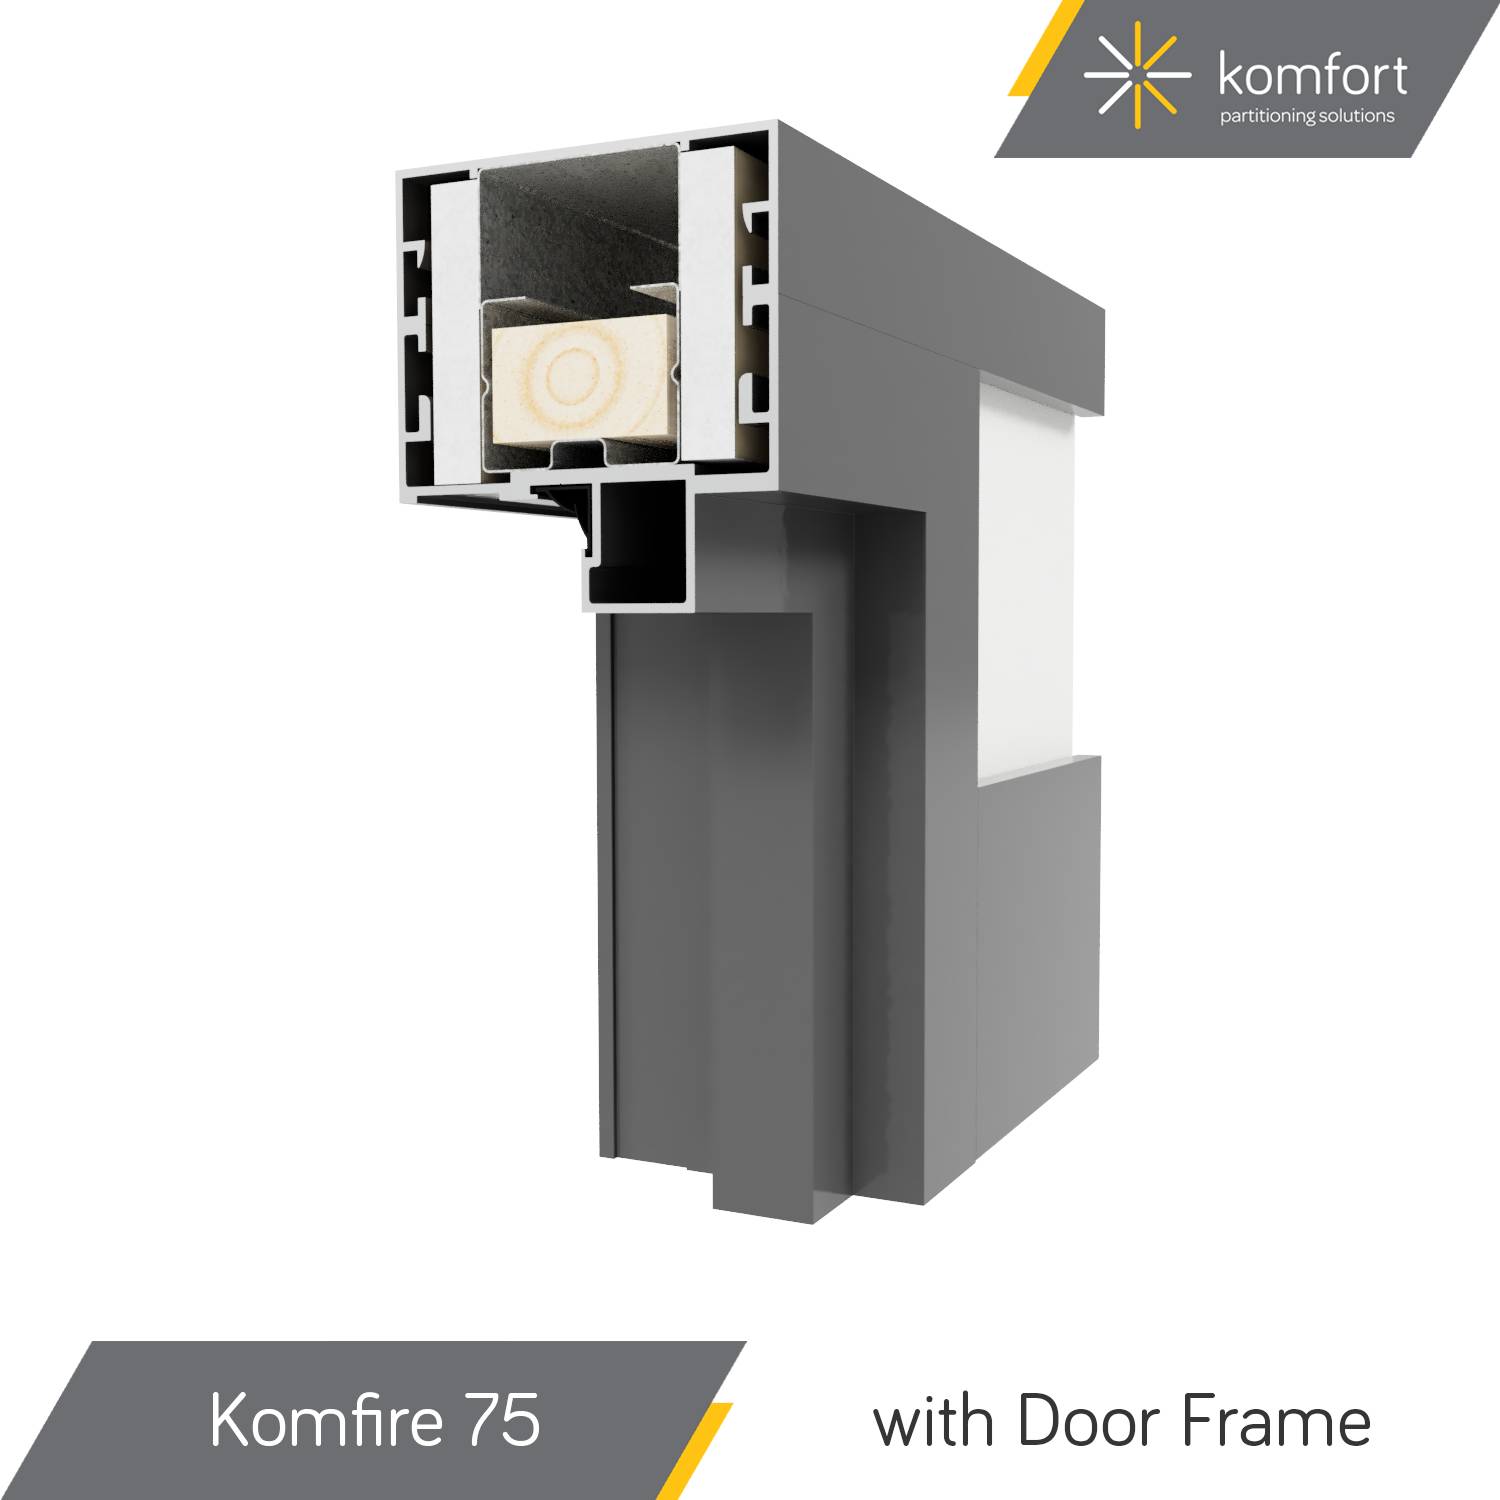 Komfort | Komfire 75 | Non-Fire Rated Solid & Glazed Partitioning